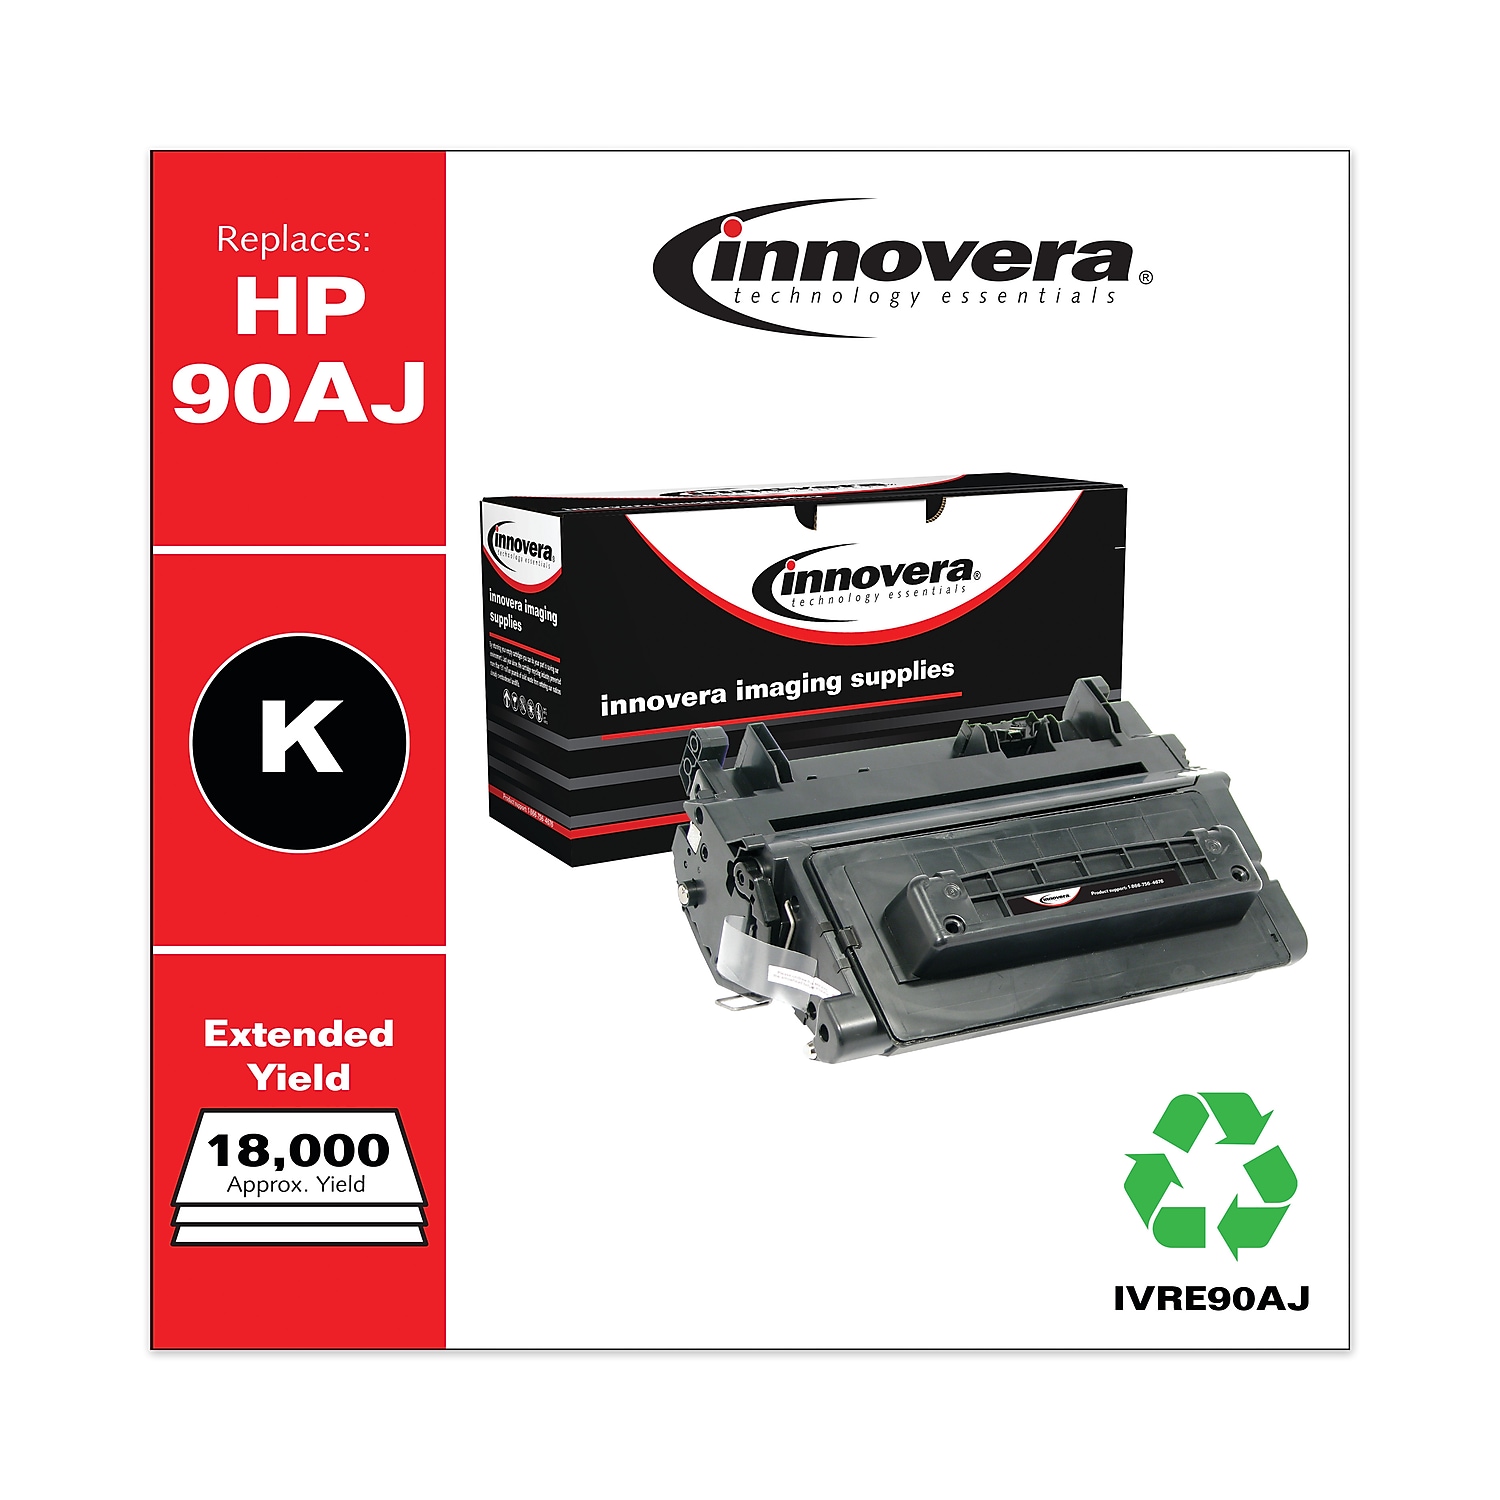 Innovera IVRE90AJ Remanufactured 18000-Page Extended-Yield Toner for HP 90A (CE390AJ) - Black - image 2 of 6